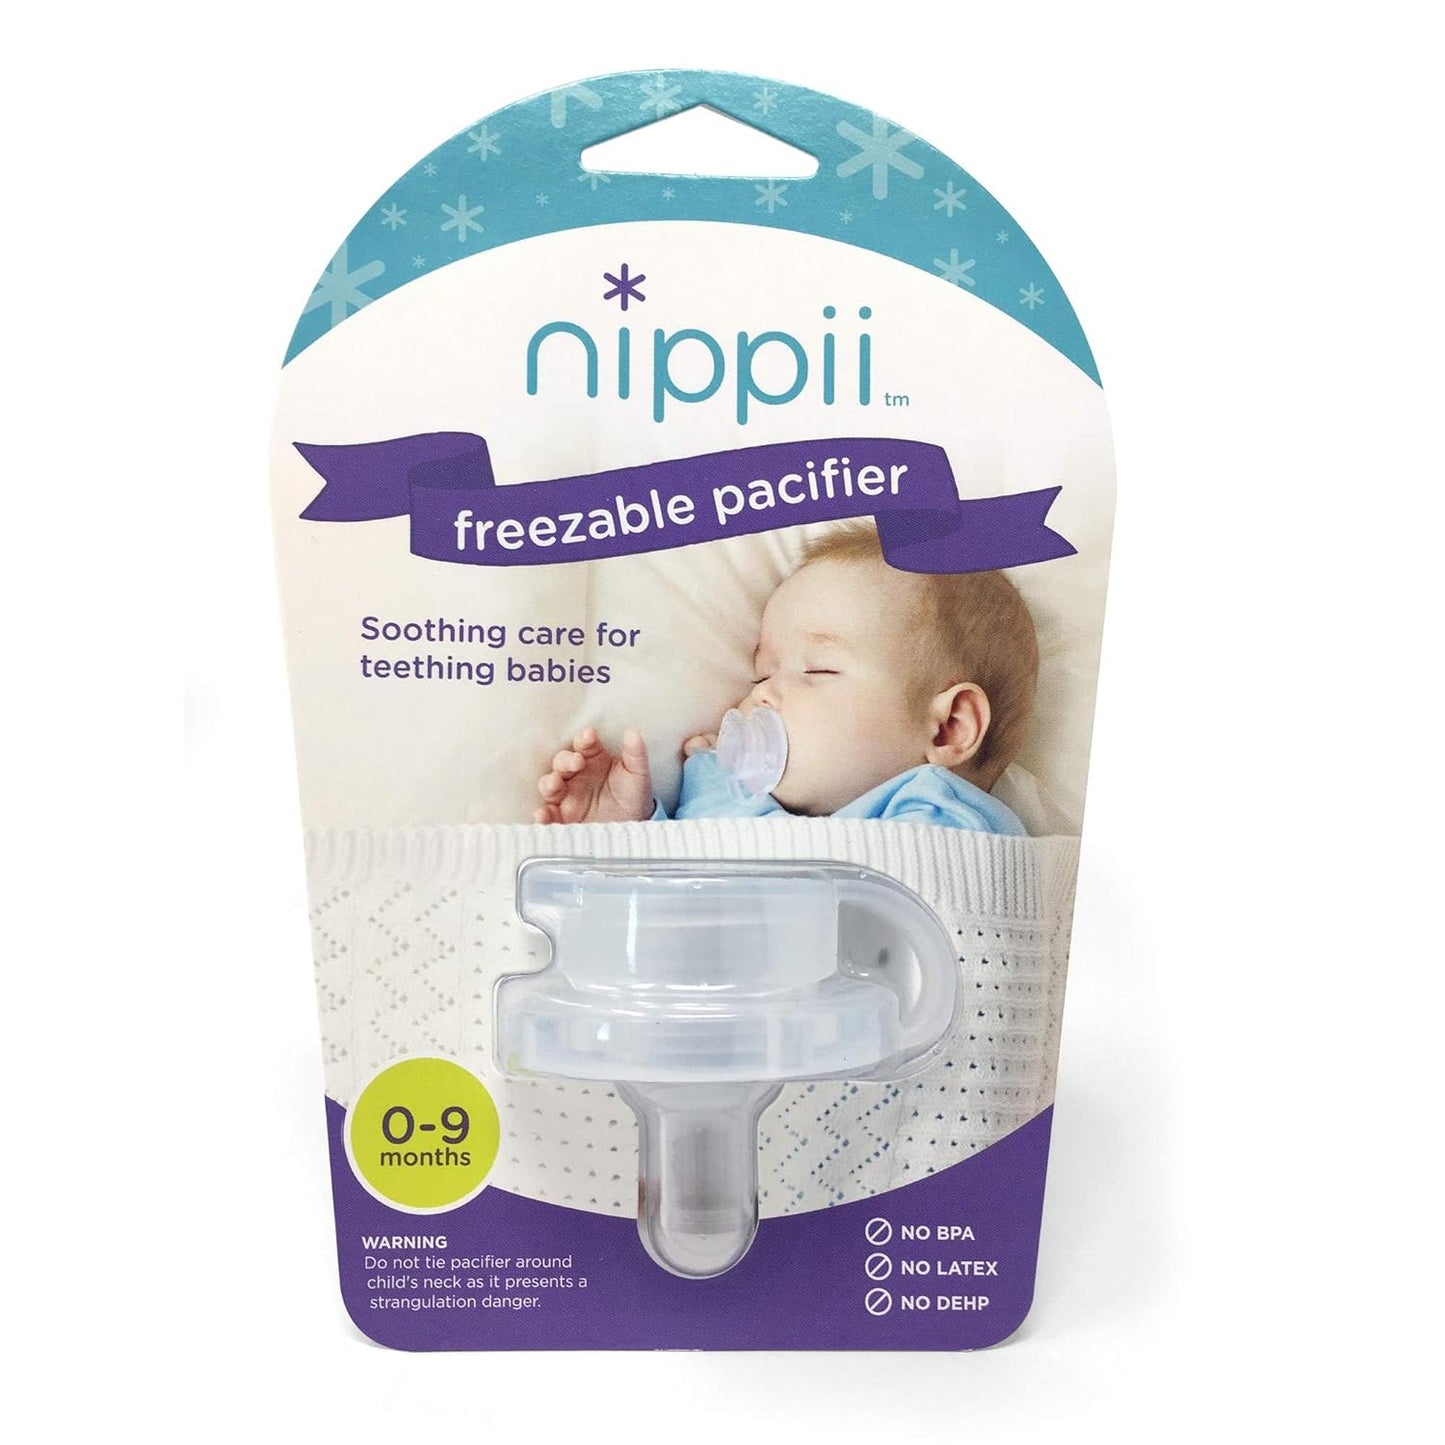 Nippii Original Freezable Pacifier and Ice Cube Tray Bundle.